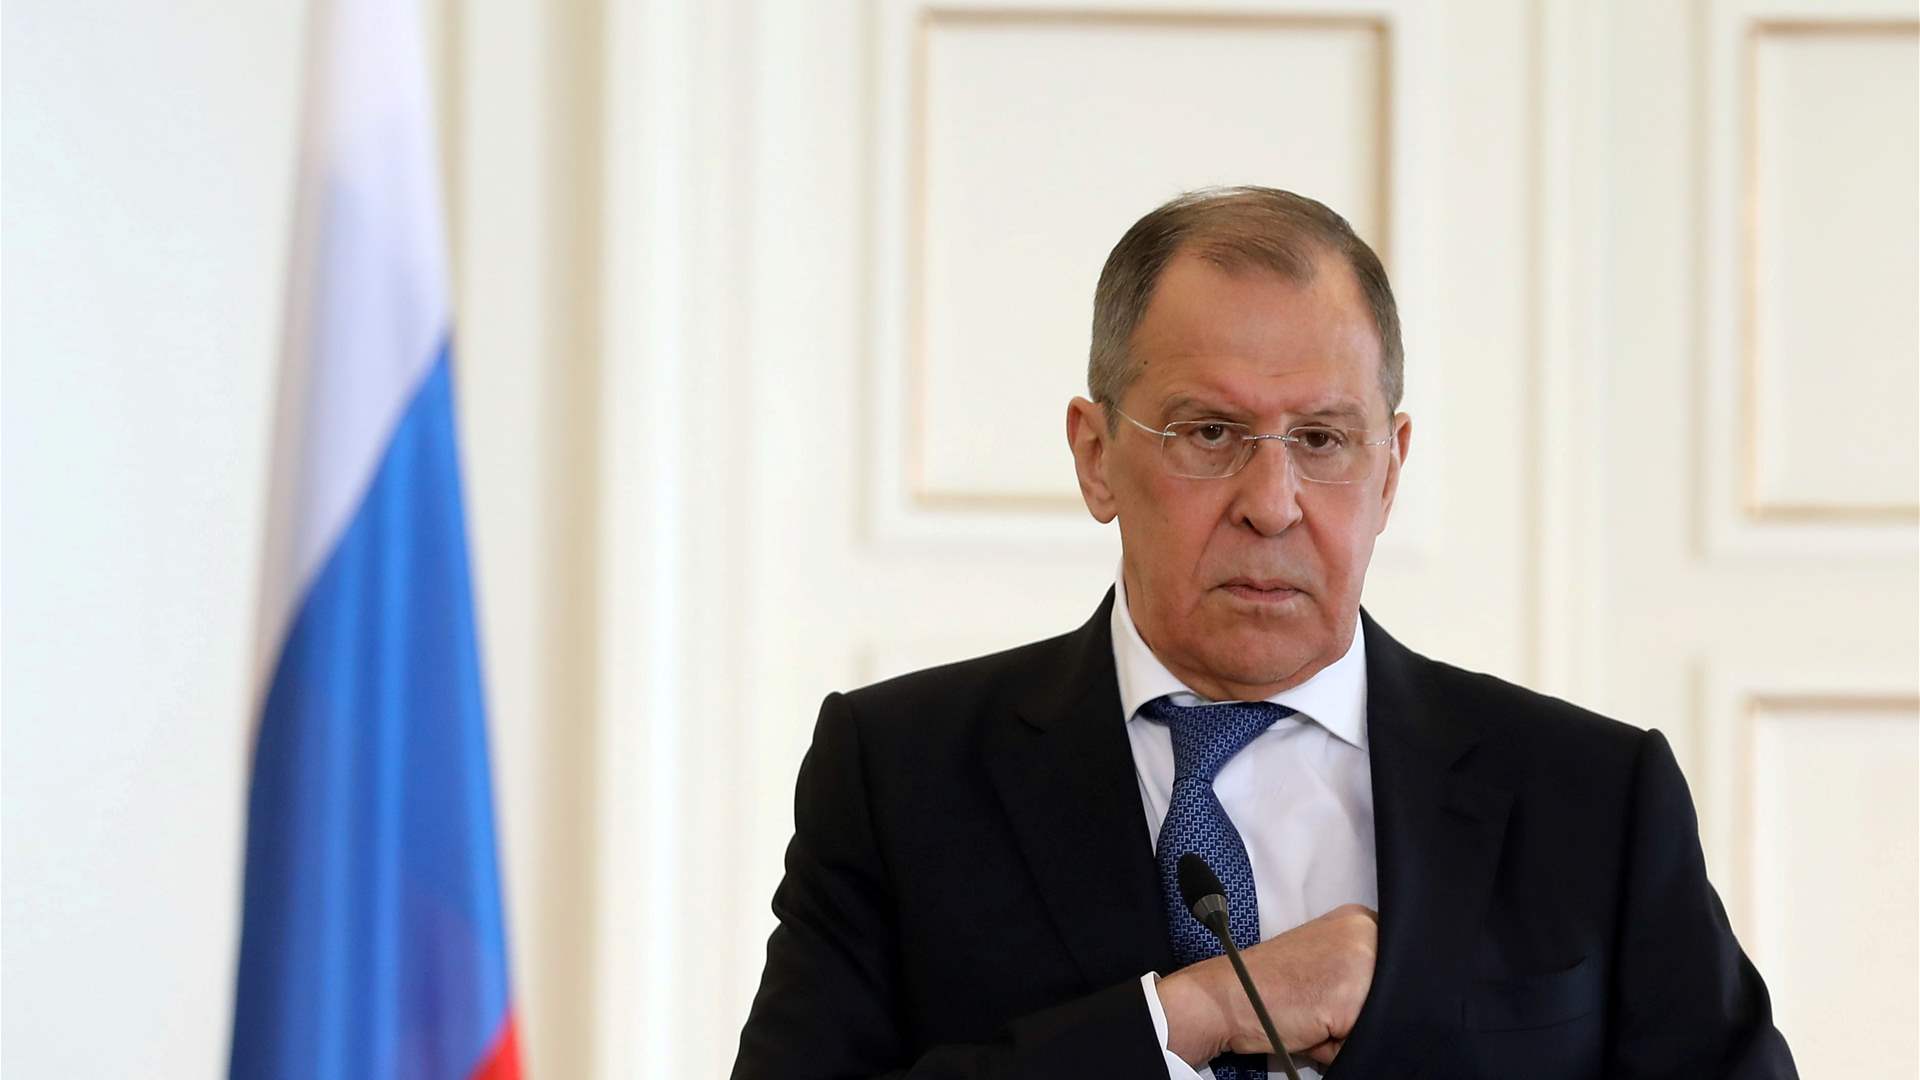 EU trying to push Russia out of Central Asia: Lavrov